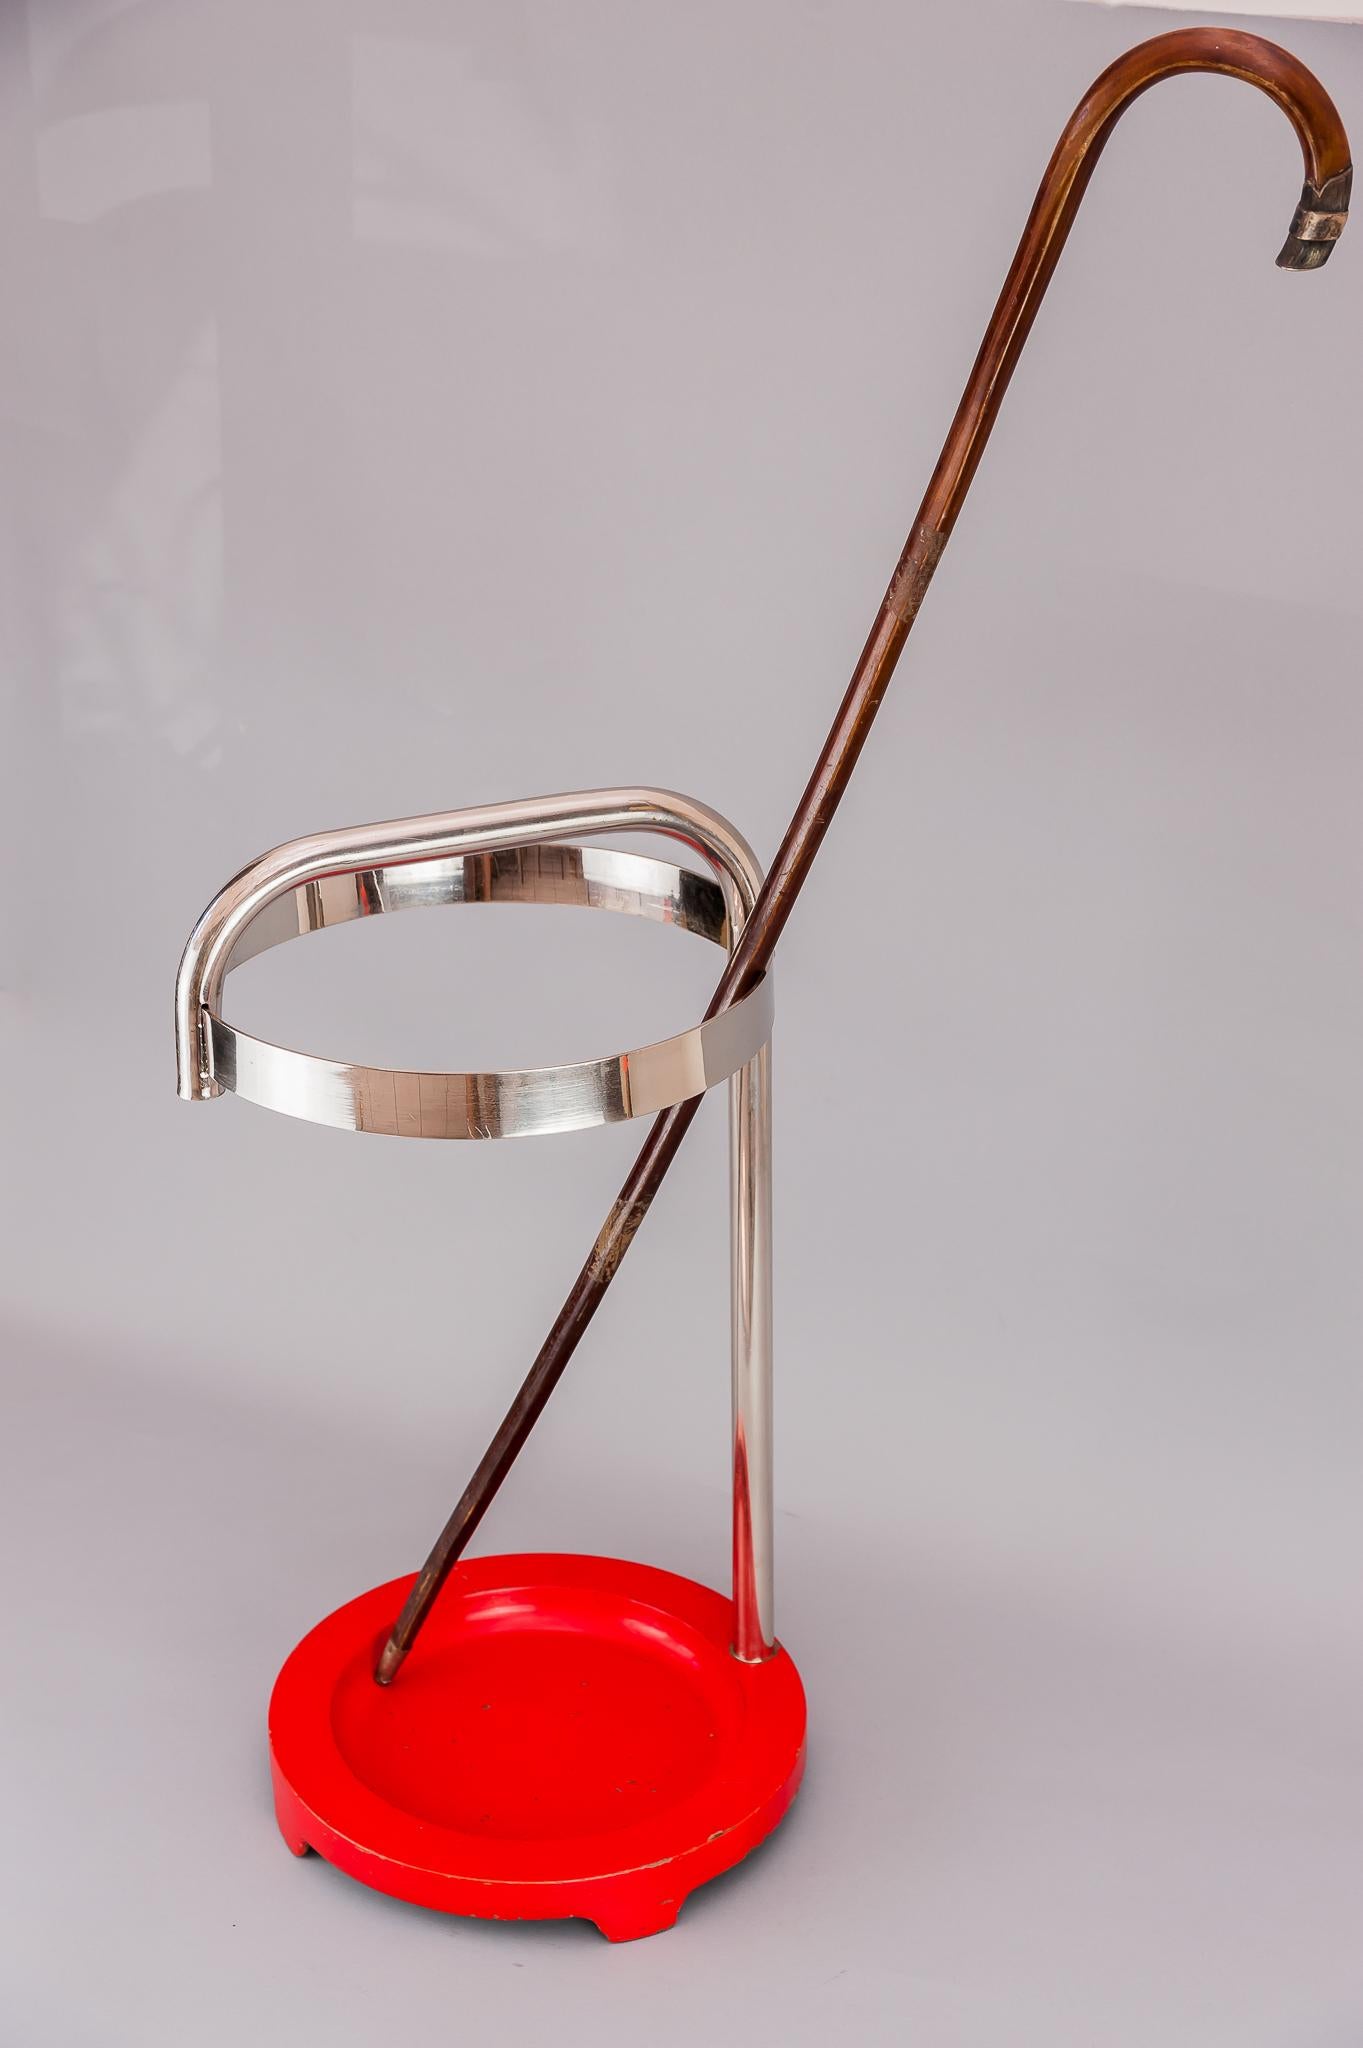 Painted Art Deco Umbrella and Walking Stick Stand, circa 1930s